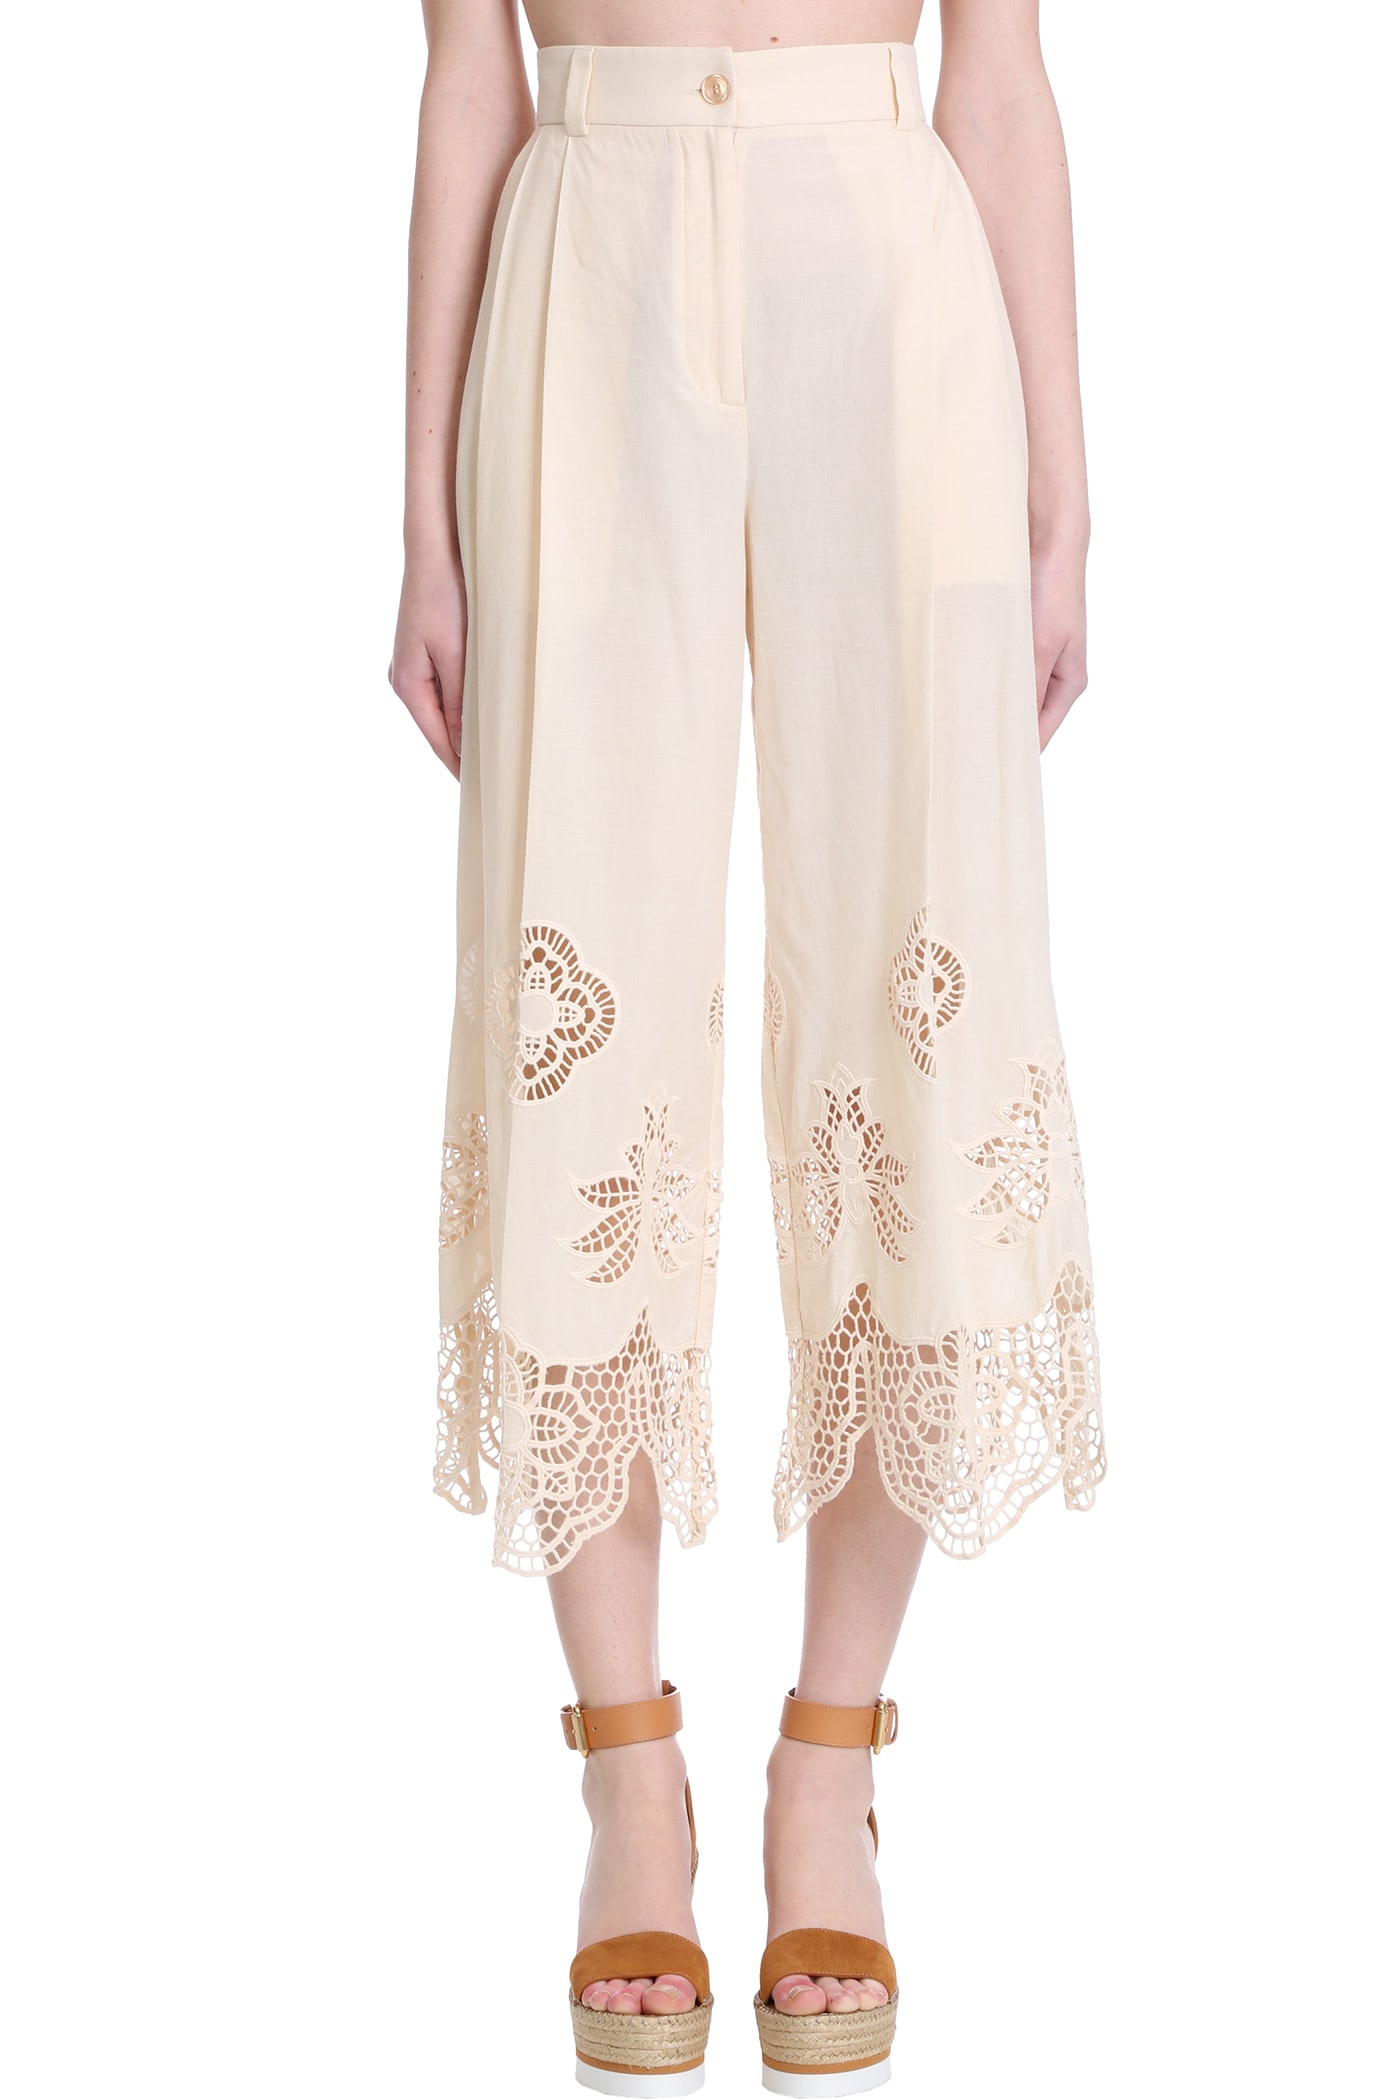 SEE BY CHLOÉ PANTS IN BEIGE COTTON,S21UPA11025293